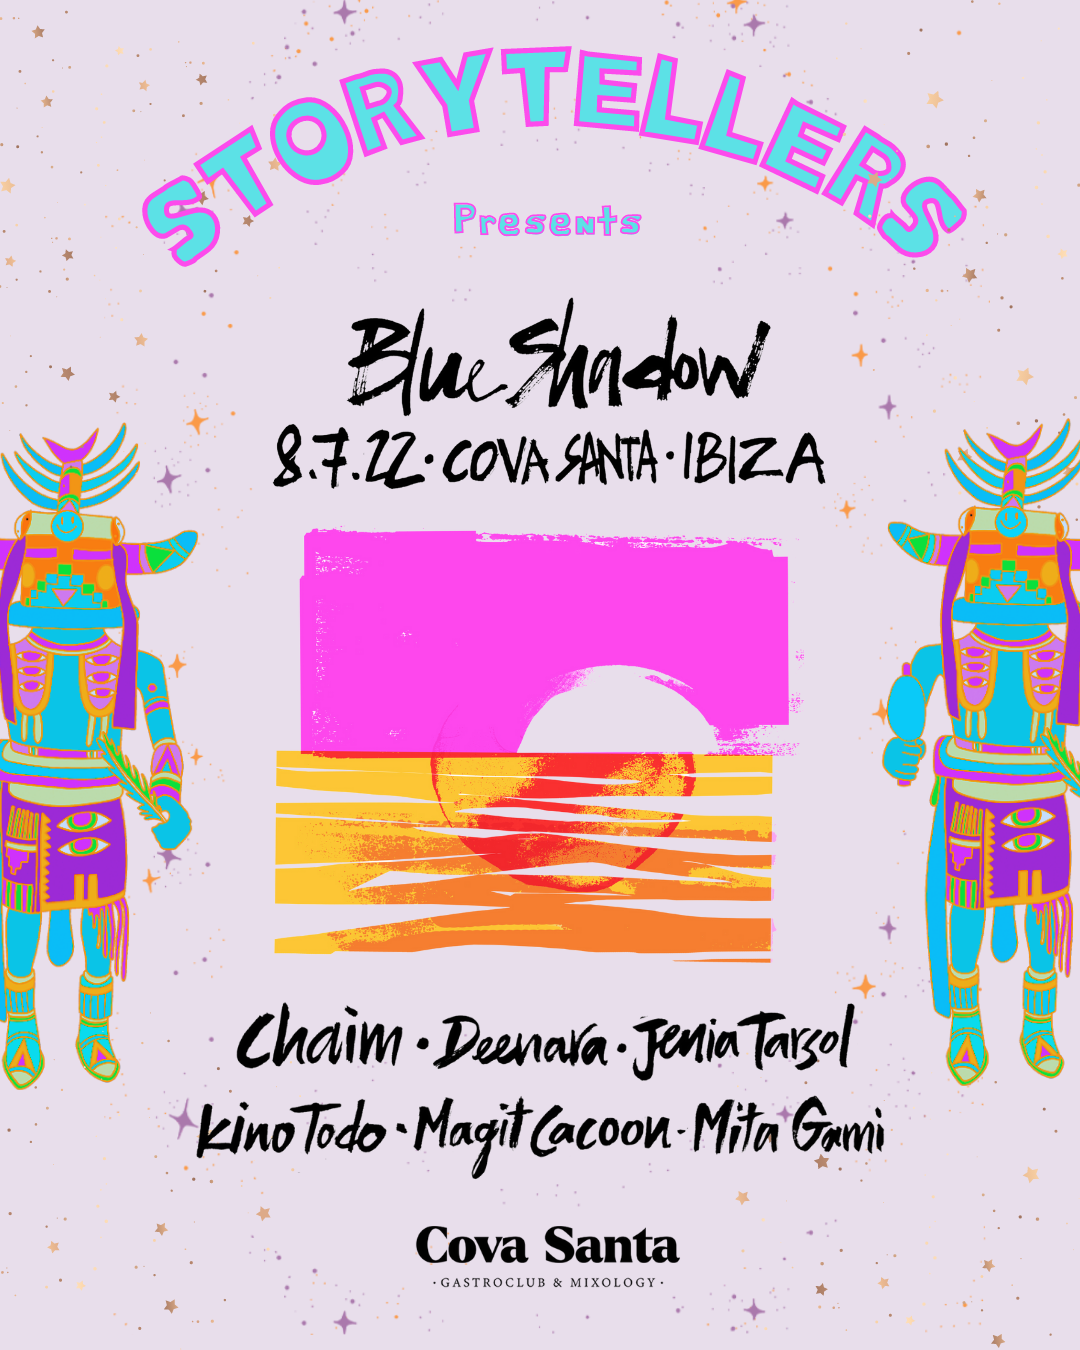 Storytellers presents: BLUE SHADOW - Flyer front